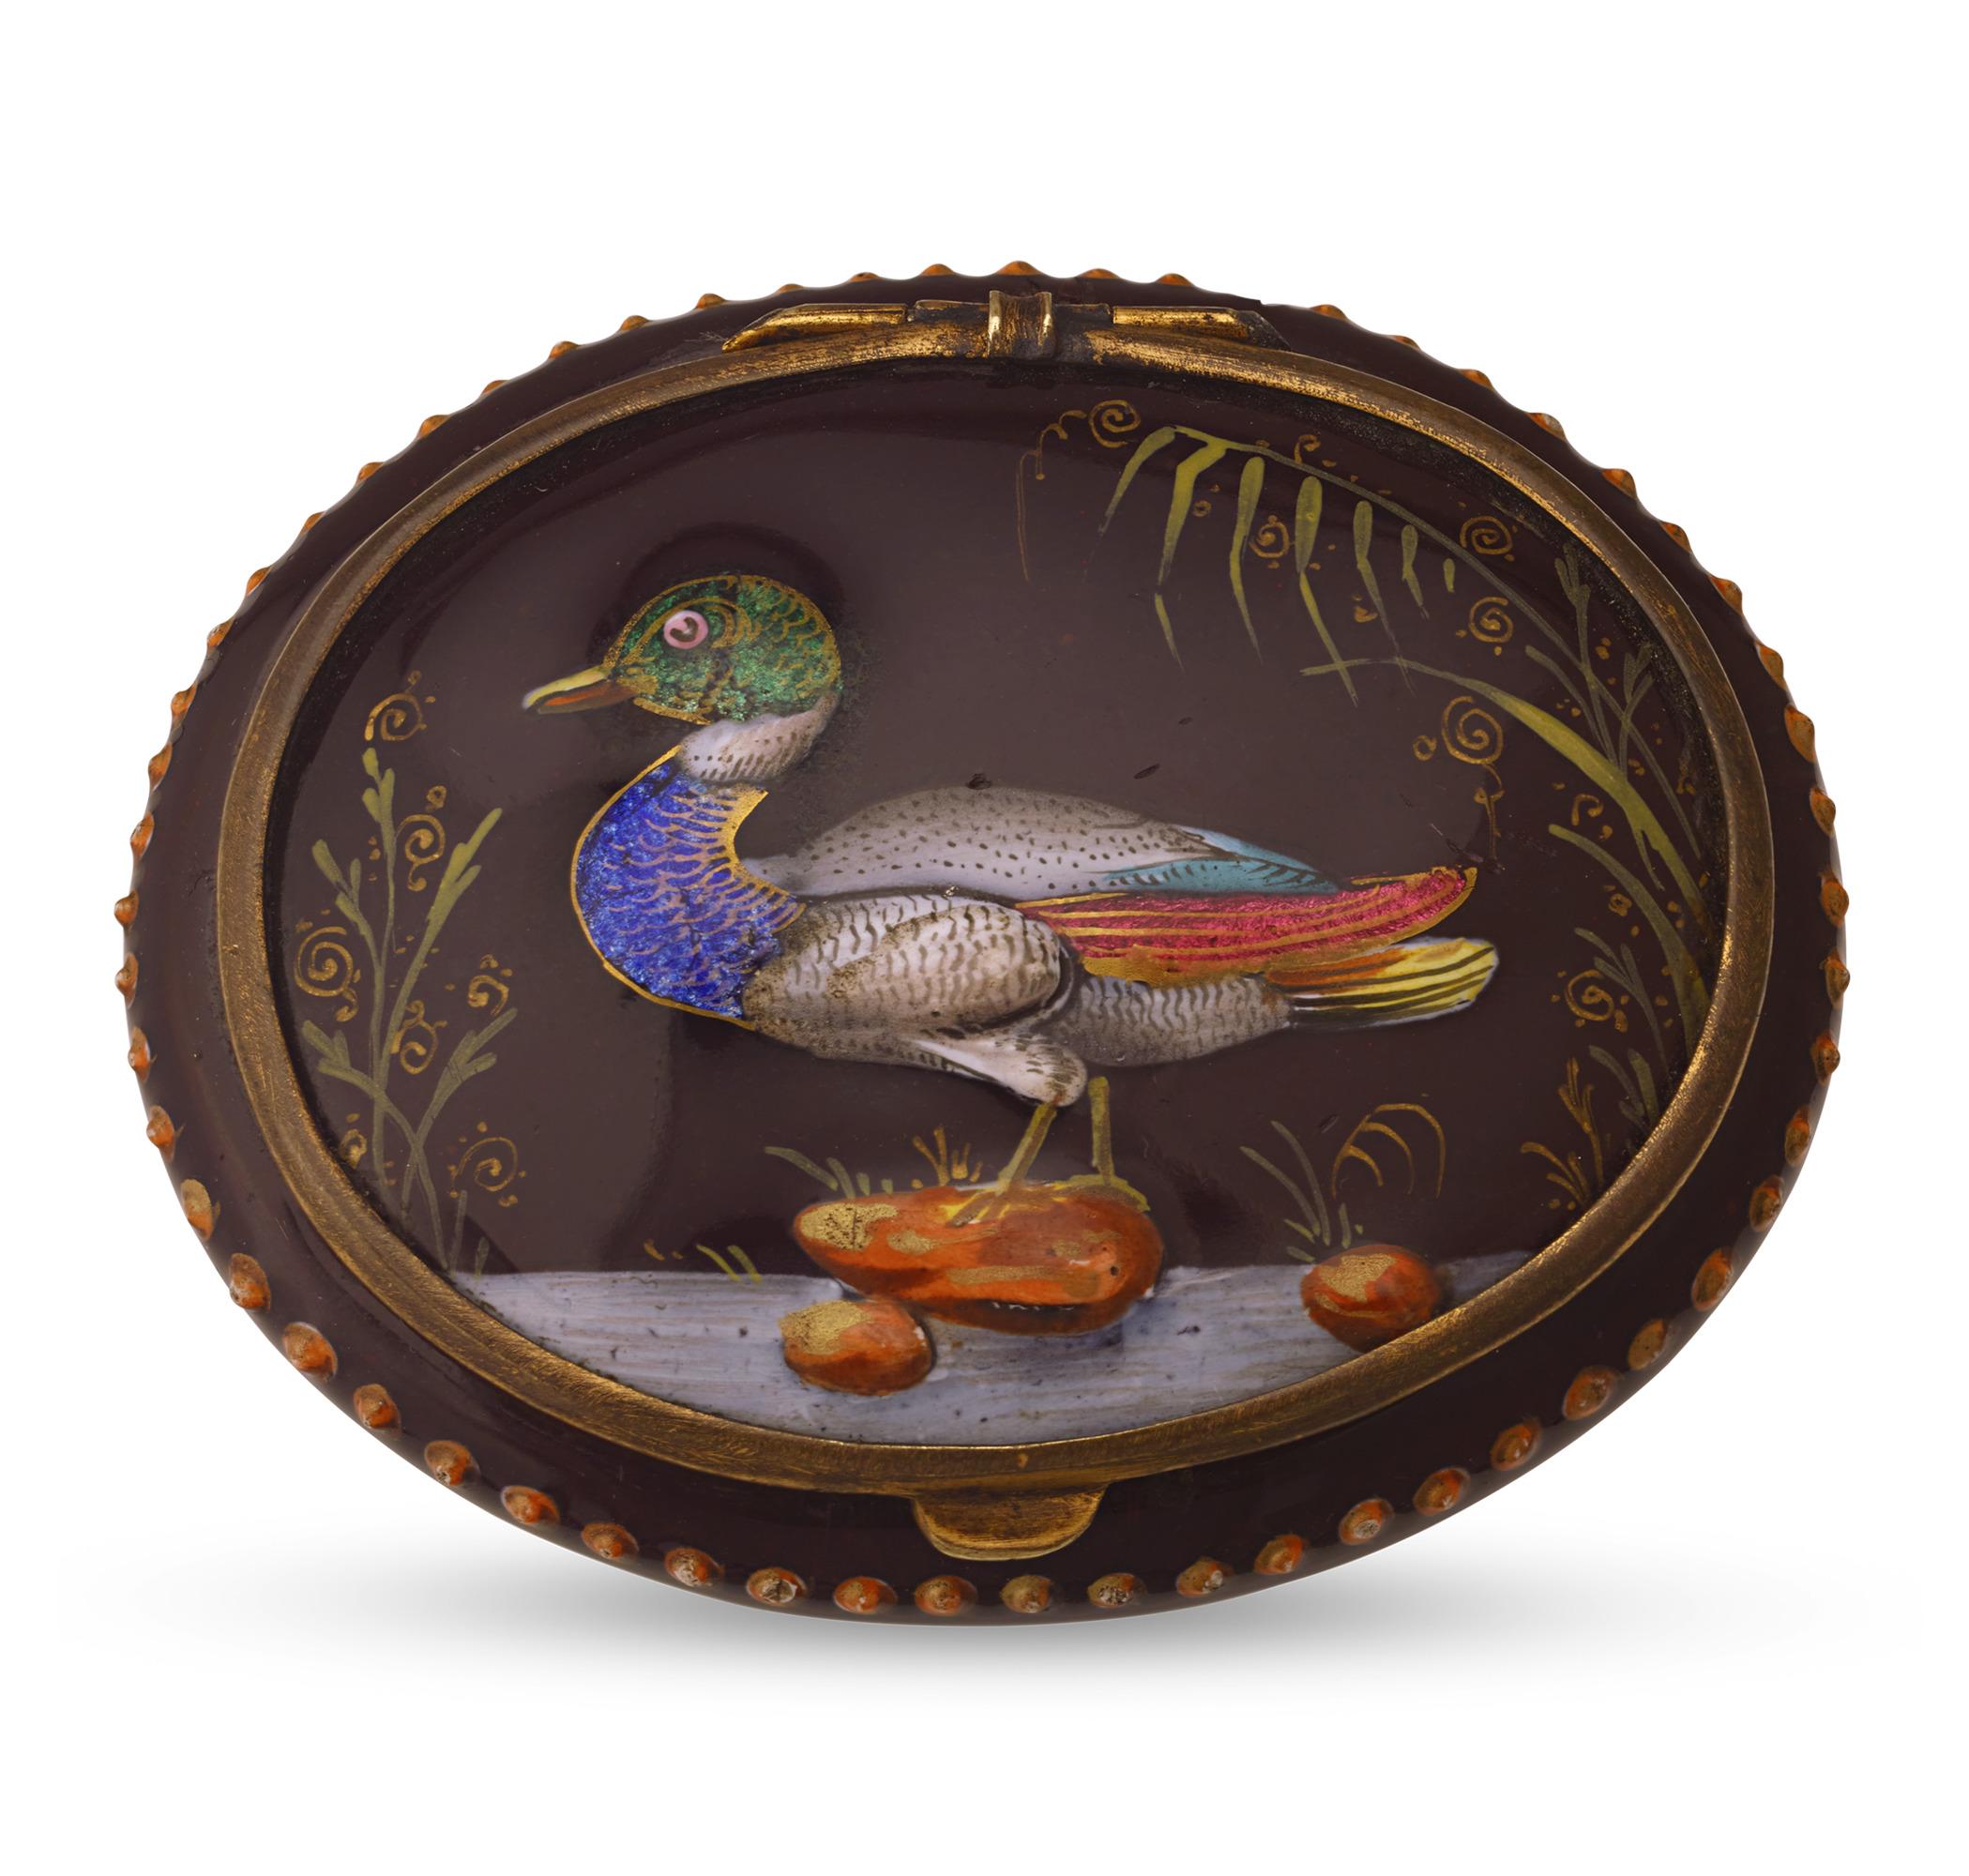 This delightful porcelain and enamel box perfectly exemplifies the esteemed French Limoges tradition. It features a meticulously hand-applied pink and blue floral scene against a brown background. The lid is adorned with gold paint and showcases a